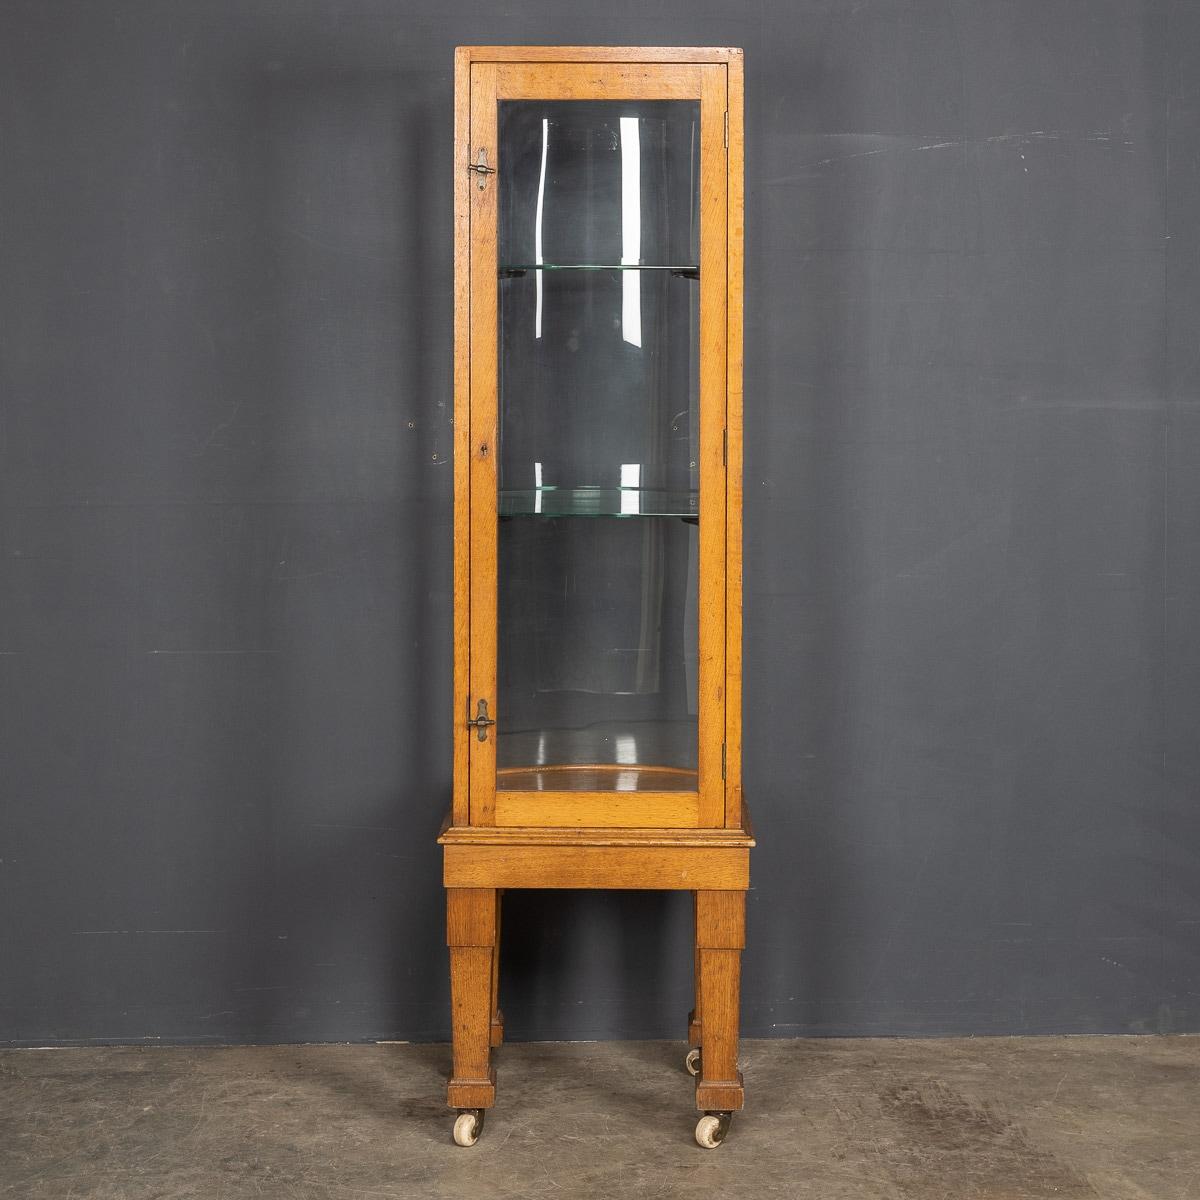 20th Century English Art Deco Display Cabinet, c.1920 In Good Condition For Sale In Royal Tunbridge Wells, Kent